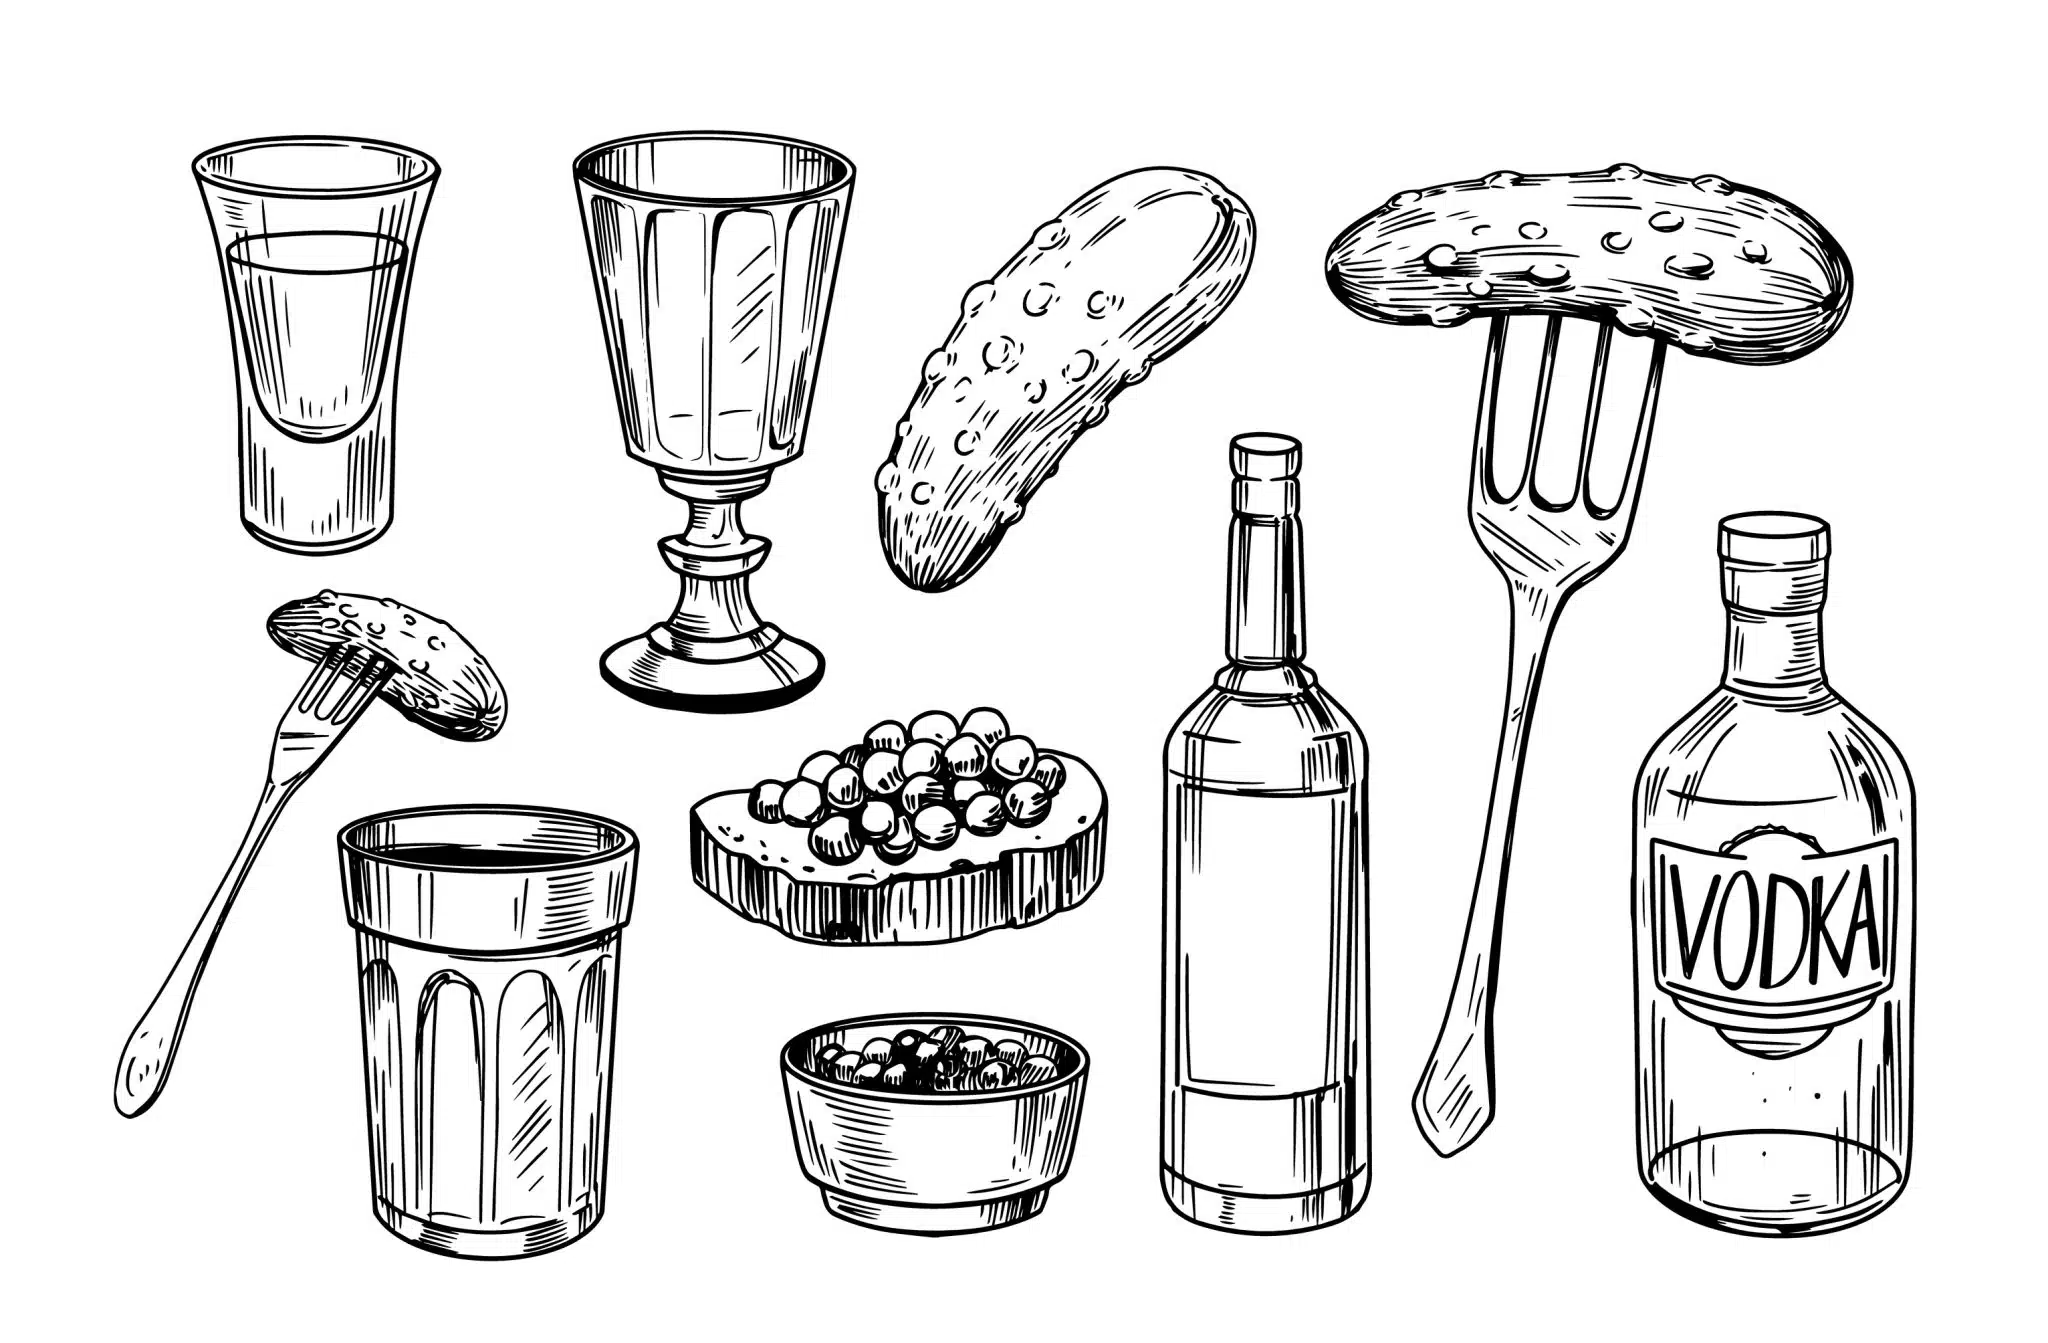  A drawing of vodka drinks and snacks: two glasses, a bottle, pickles on a fork, a sandwich, and a bowl of snacks.